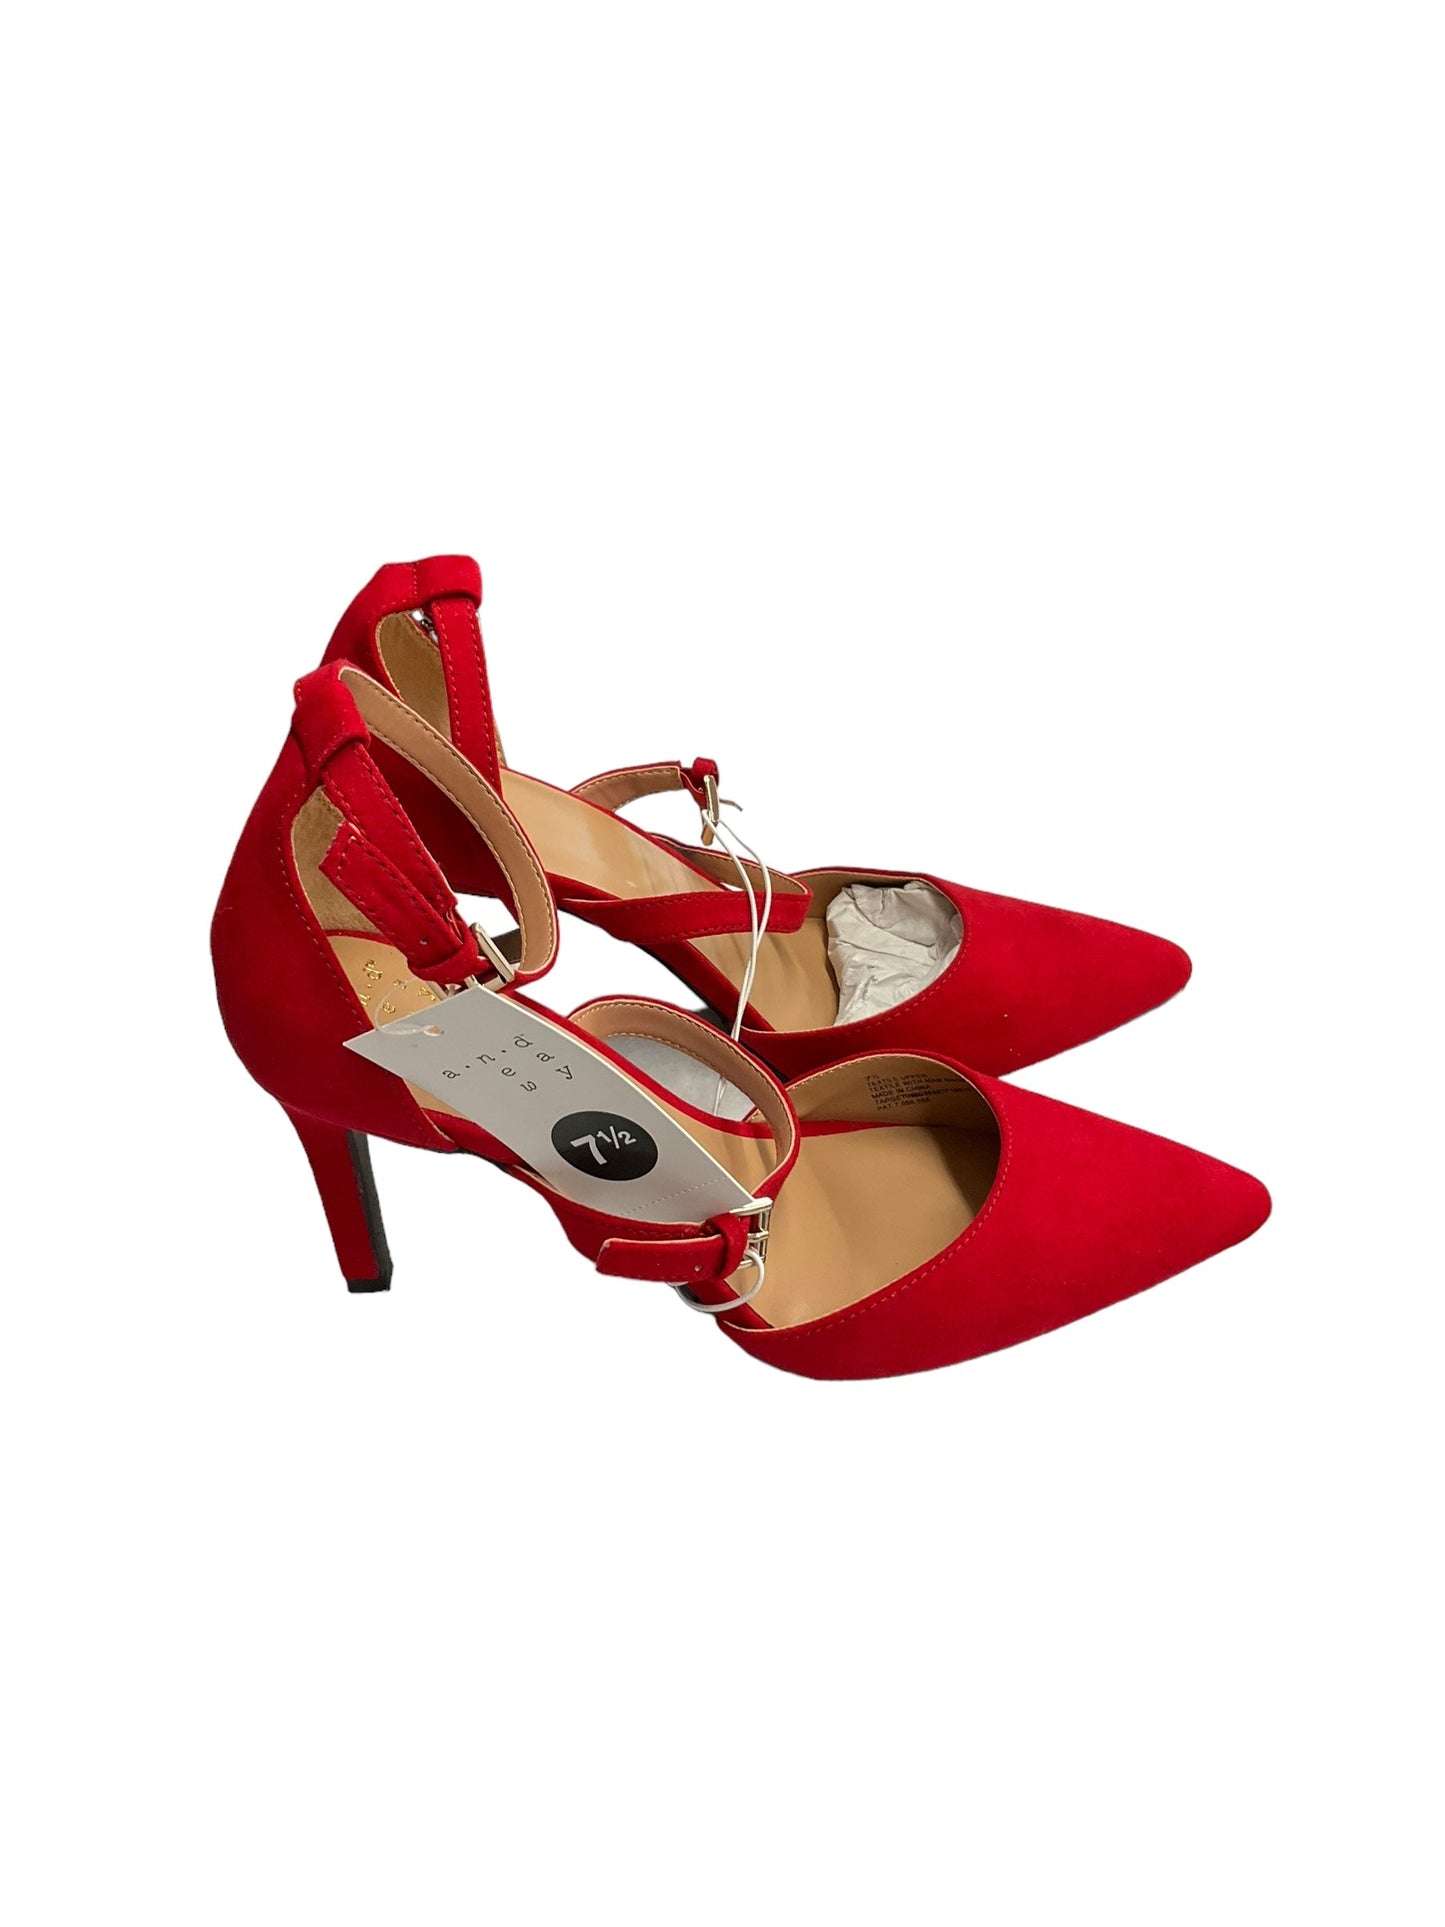 Red Shoes Heels Stiletto A New Day, Size 7.5